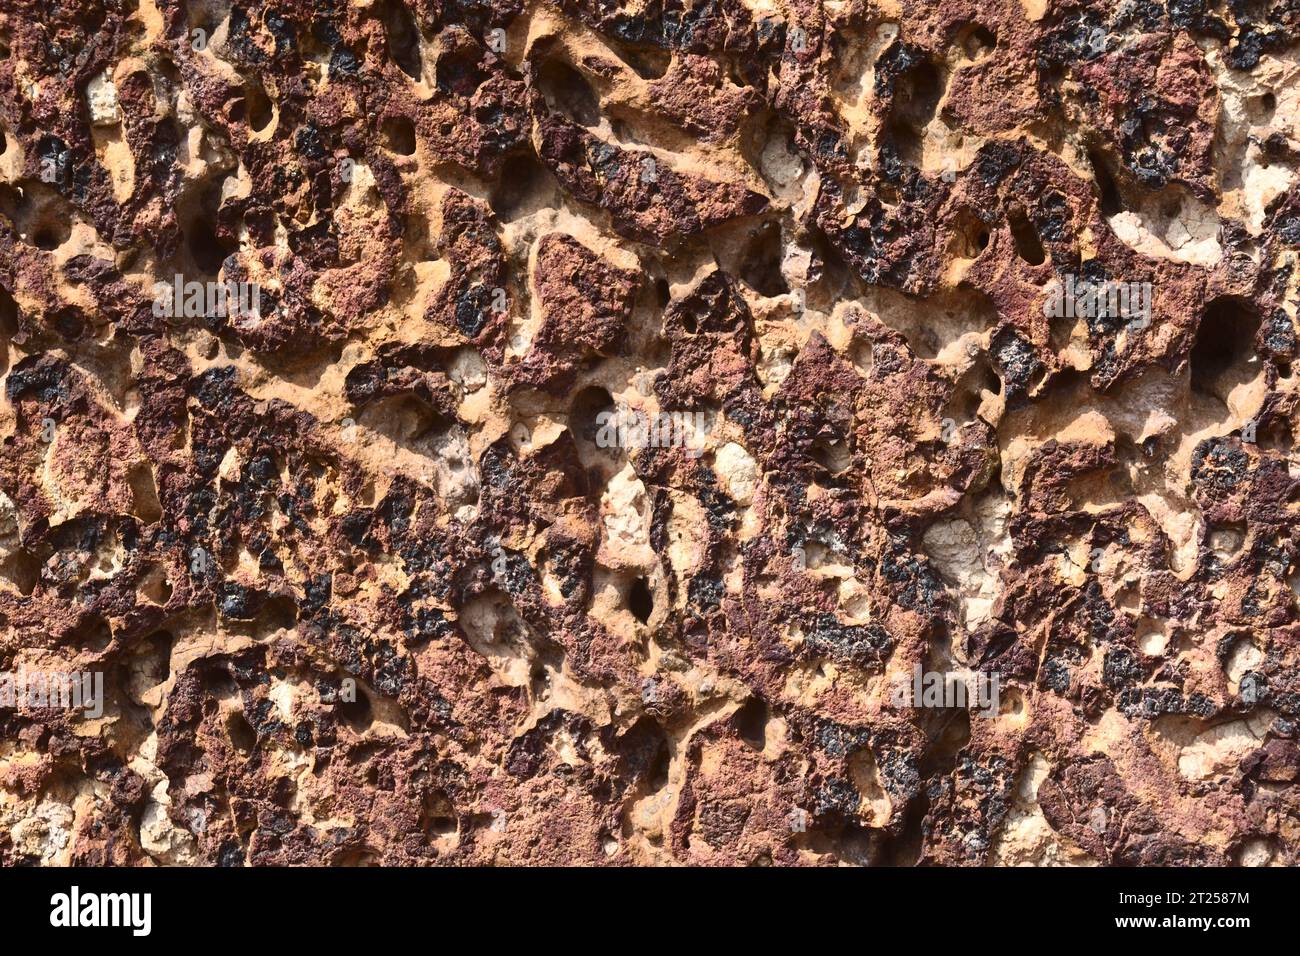 Many holes on the brown with orange and red color surface of the old laterite rock Stock Photo